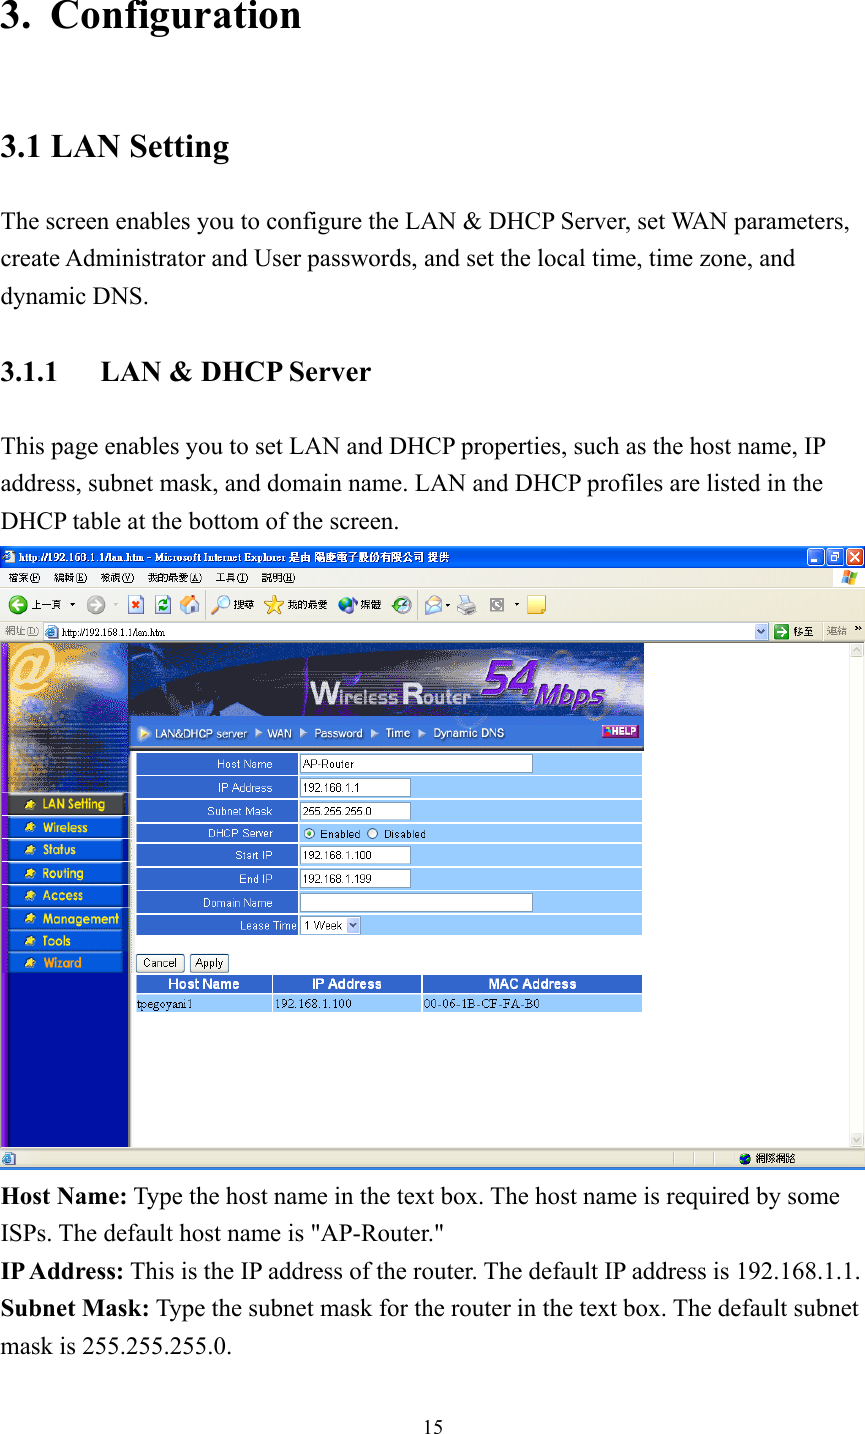 3. Configuration 3.1 LAN Setting The screen enables you to configure the LAN &amp; DHCP Server, set WAN parameters, create Administrator and User passwords, and set the local time, time zone, and dynamic DNS. 3.1.1  LAN &amp; DHCP Server This page enables you to set LAN and DHCP properties, such as the host name, IP address, subnet mask, and domain name. LAN and DHCP profiles are listed in the DHCP table at the bottom of the screen.  Host Name: Type the host name in the text box. The host name is required by some ISPs. The default host name is &quot;AP-Router.&quot; IP Address: This is the IP address of the router. The default IP address is 192.168.1.1. Subnet Mask: Type the subnet mask for the router in the text box. The default subnet mask is 255.255.255.0.  15